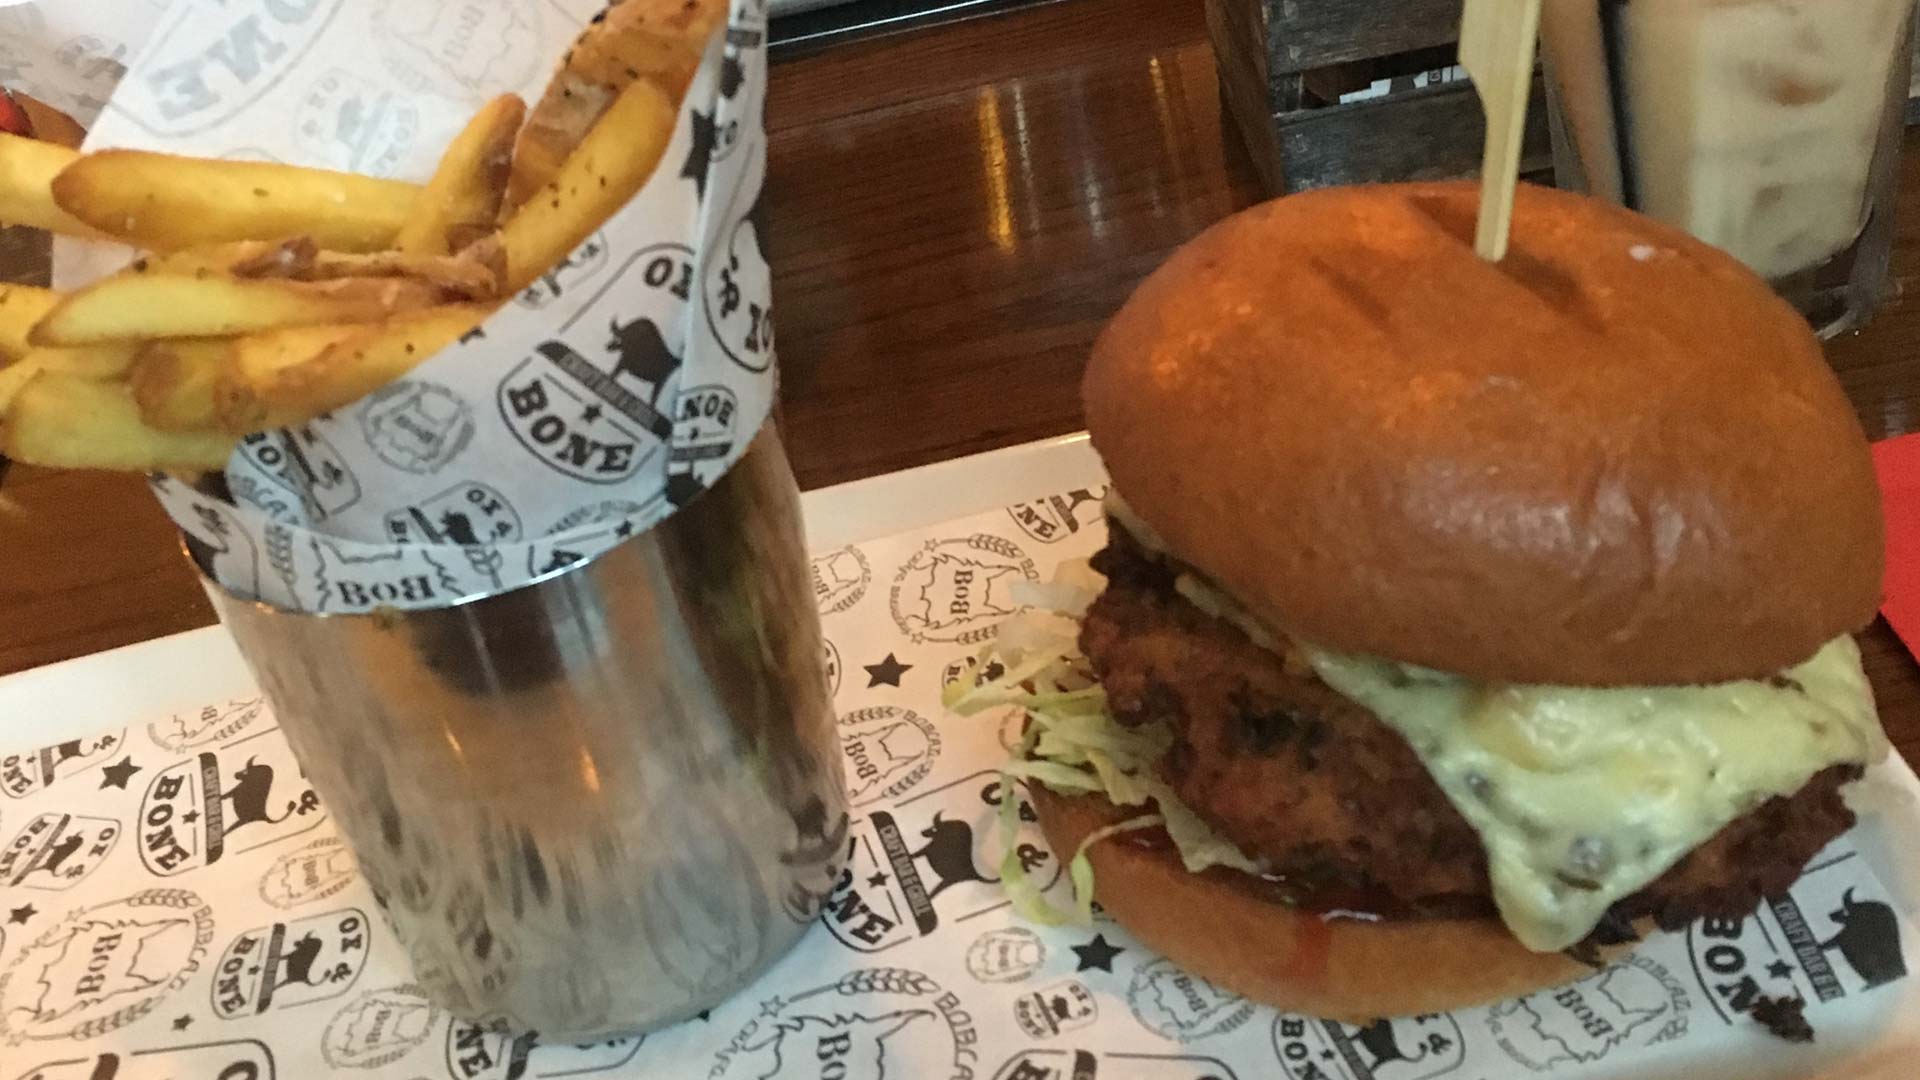 A picture of burger and chips from the Ox and Bone